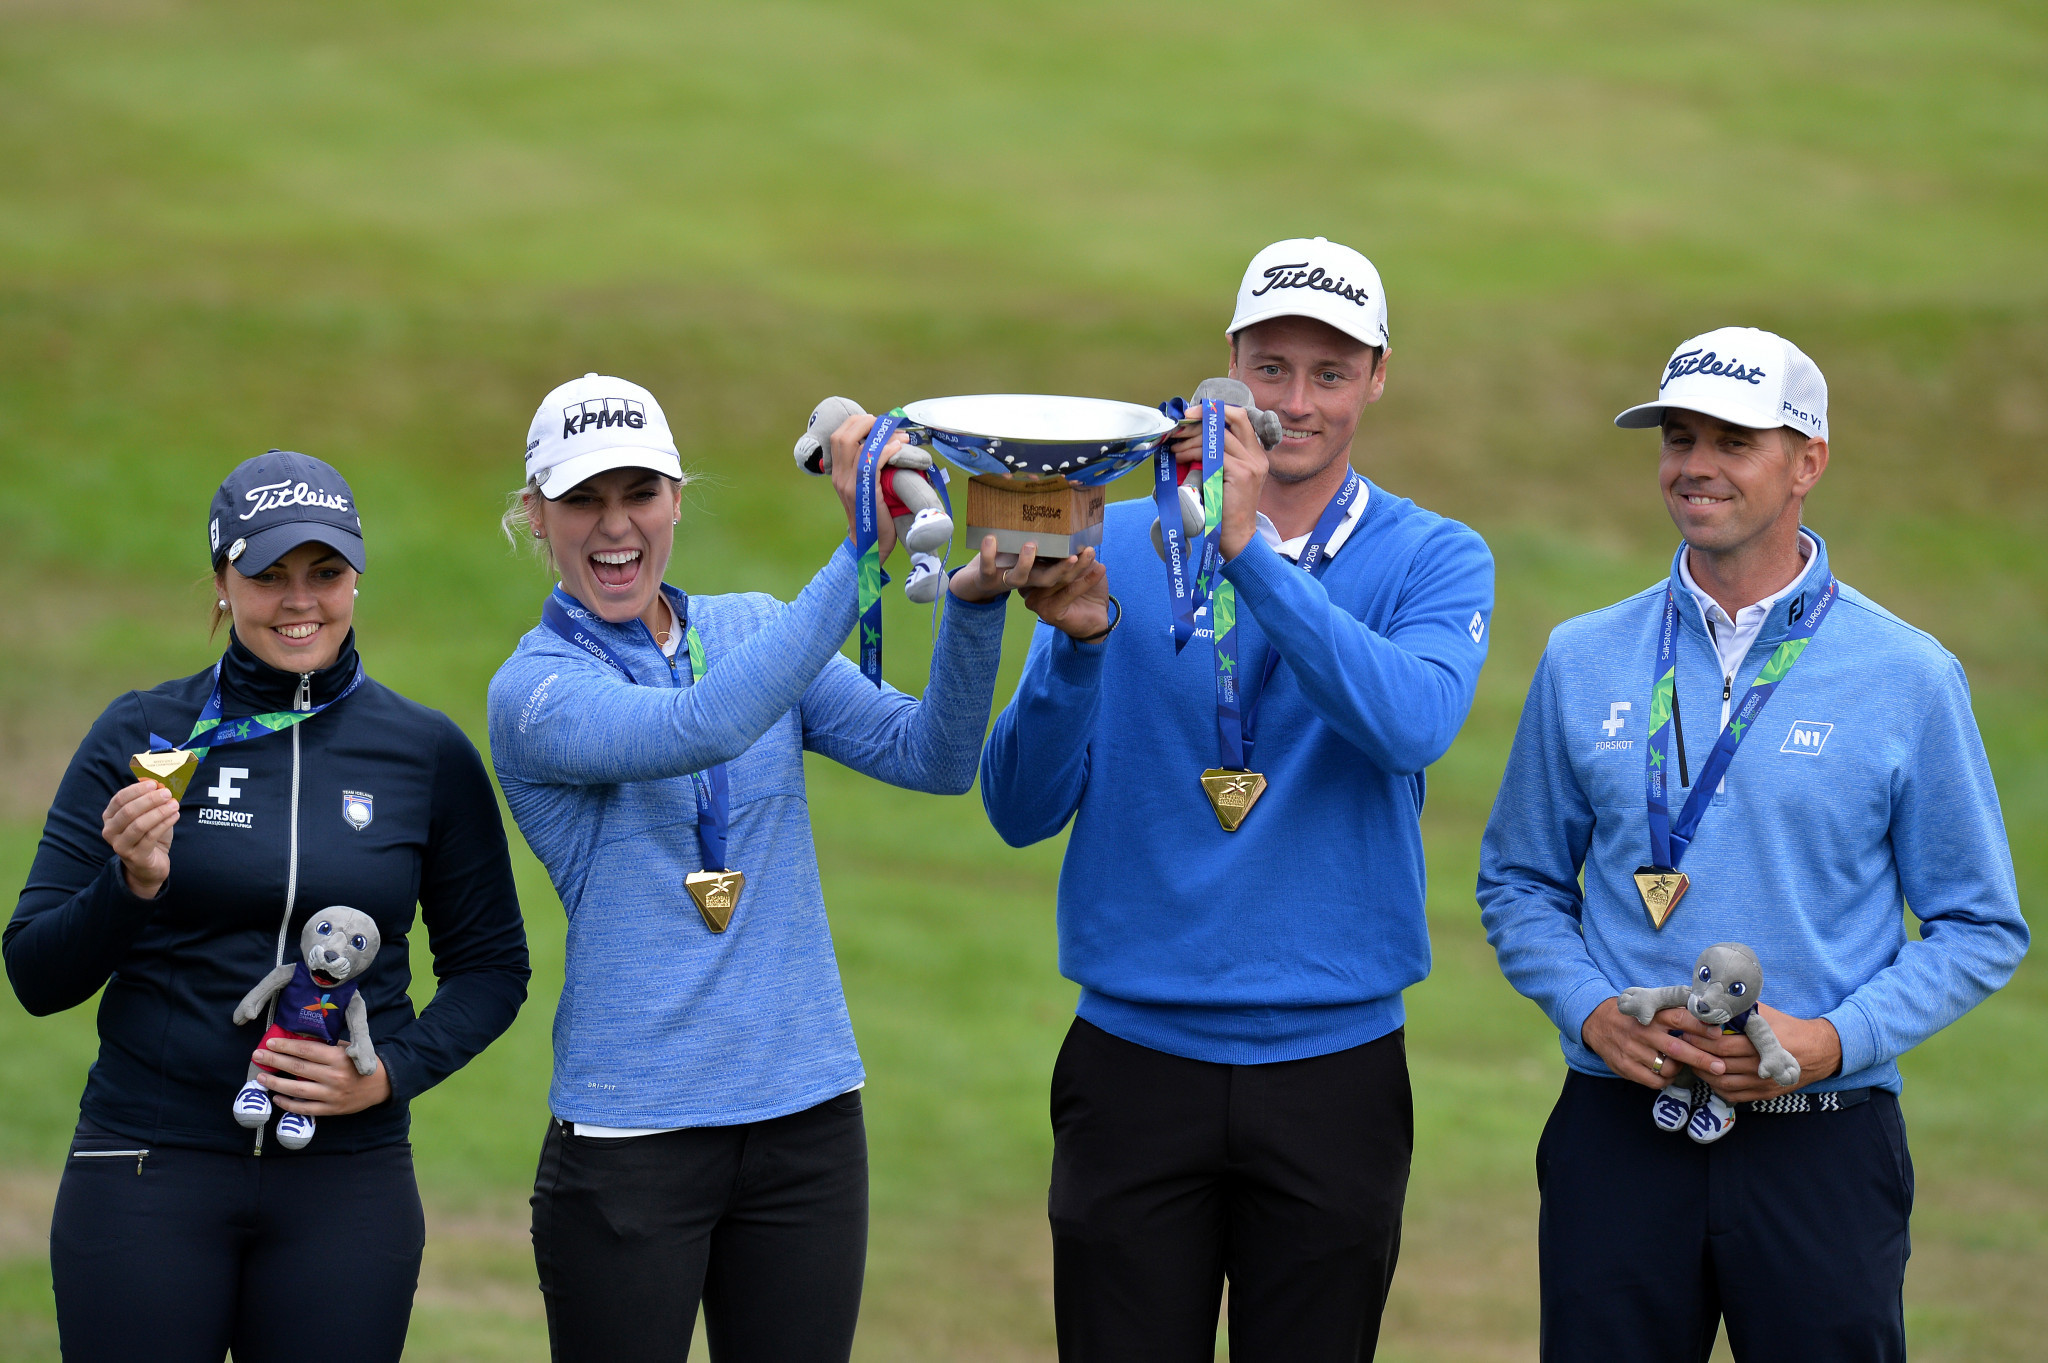 Iceland claim historic mixed team golf title on penultimate day of 2018 European Championships